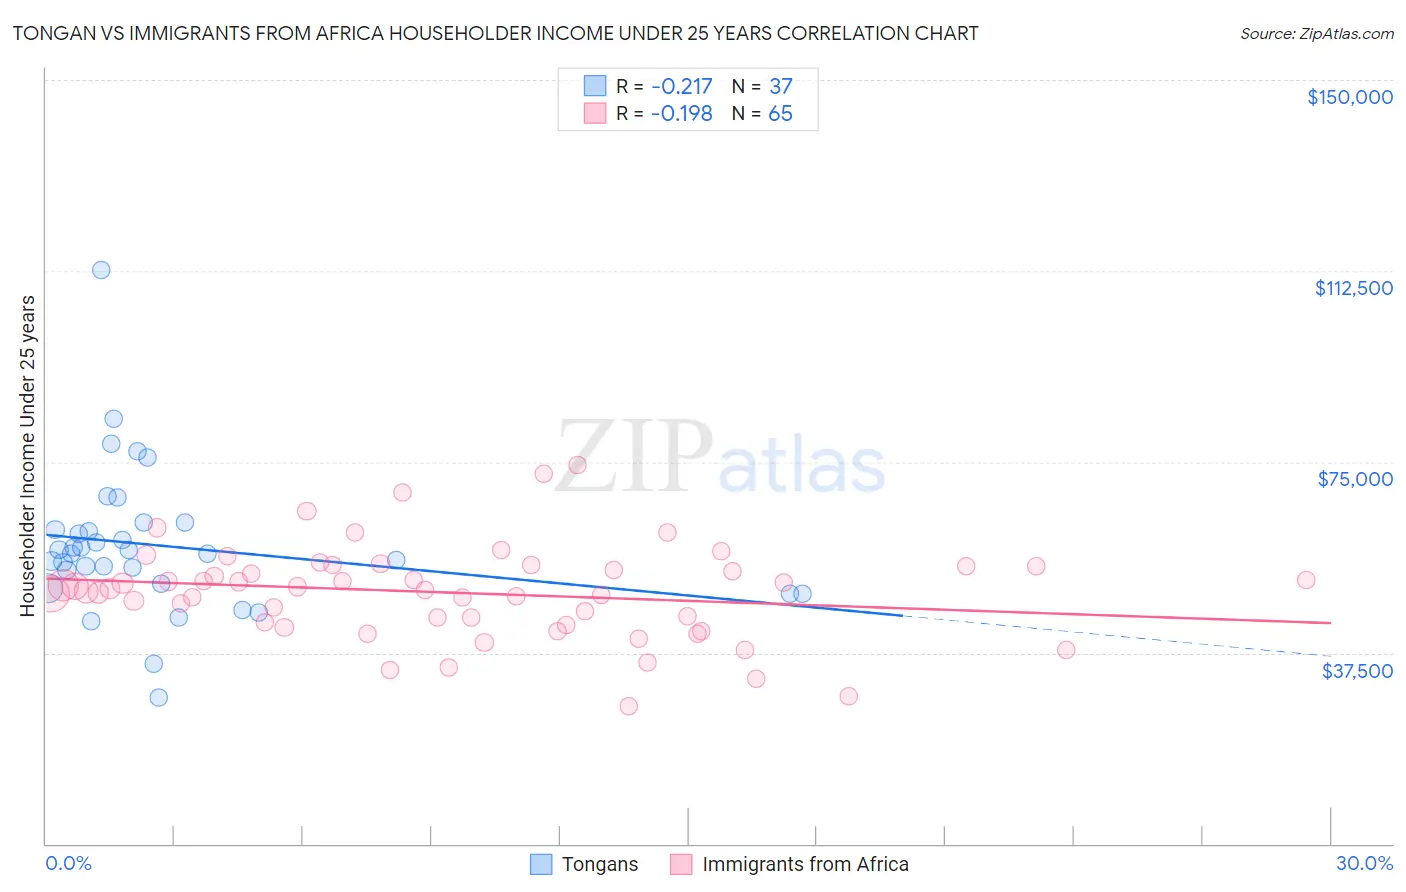 Tongan vs Immigrants from Africa Householder Income Under 25 years